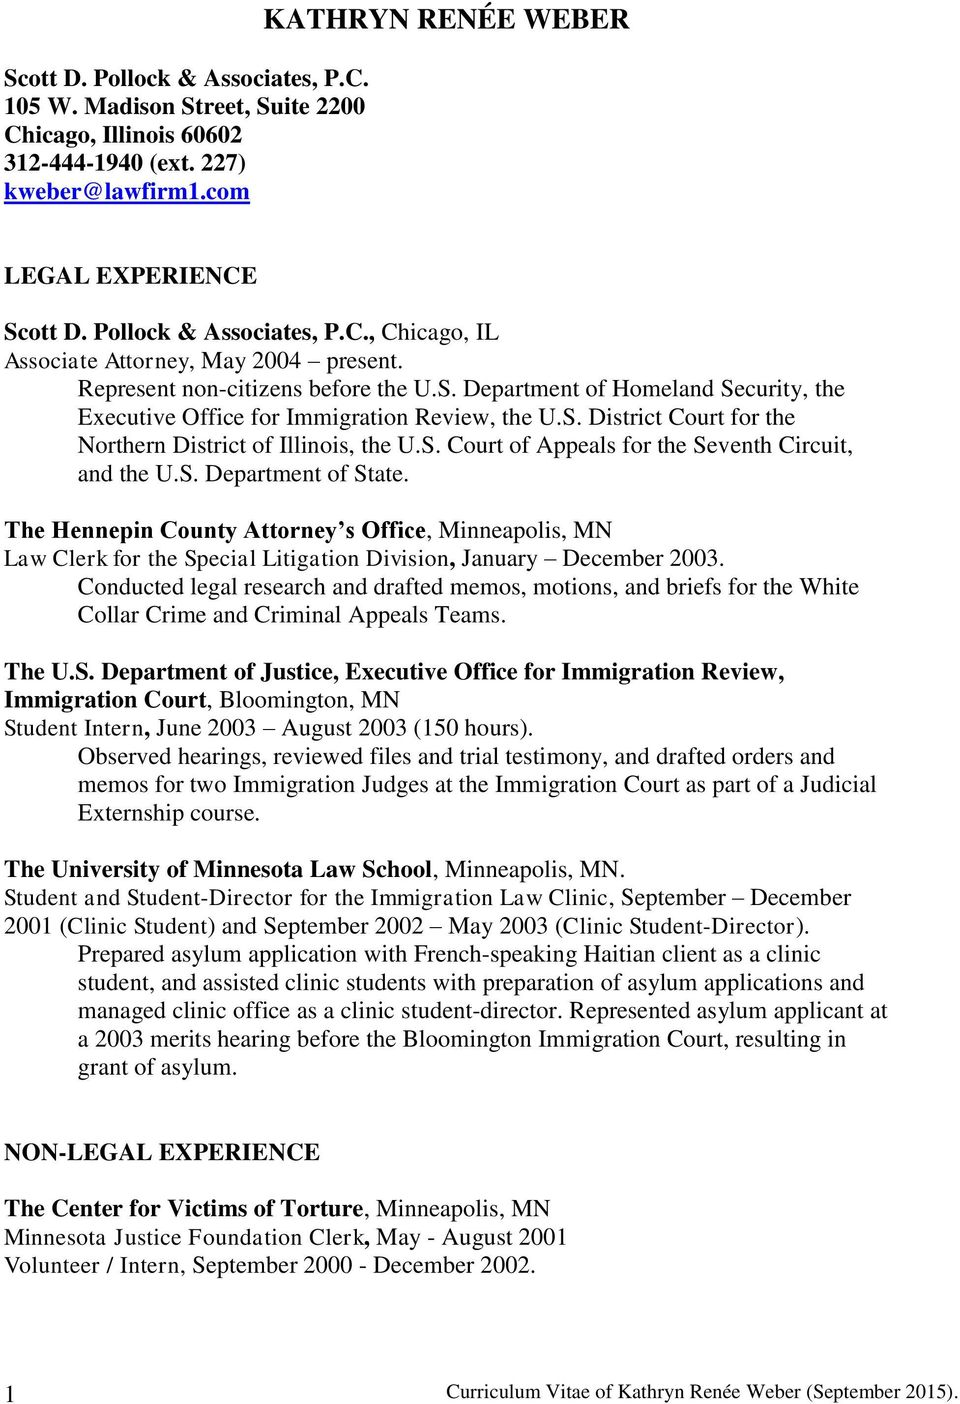 Department of Homeland Security, the Executive Office for Immigration Review, the U.S. District Court for the Northern District of Illinois, the U.S. Court of Appeals for the Seventh Circuit, and the U.